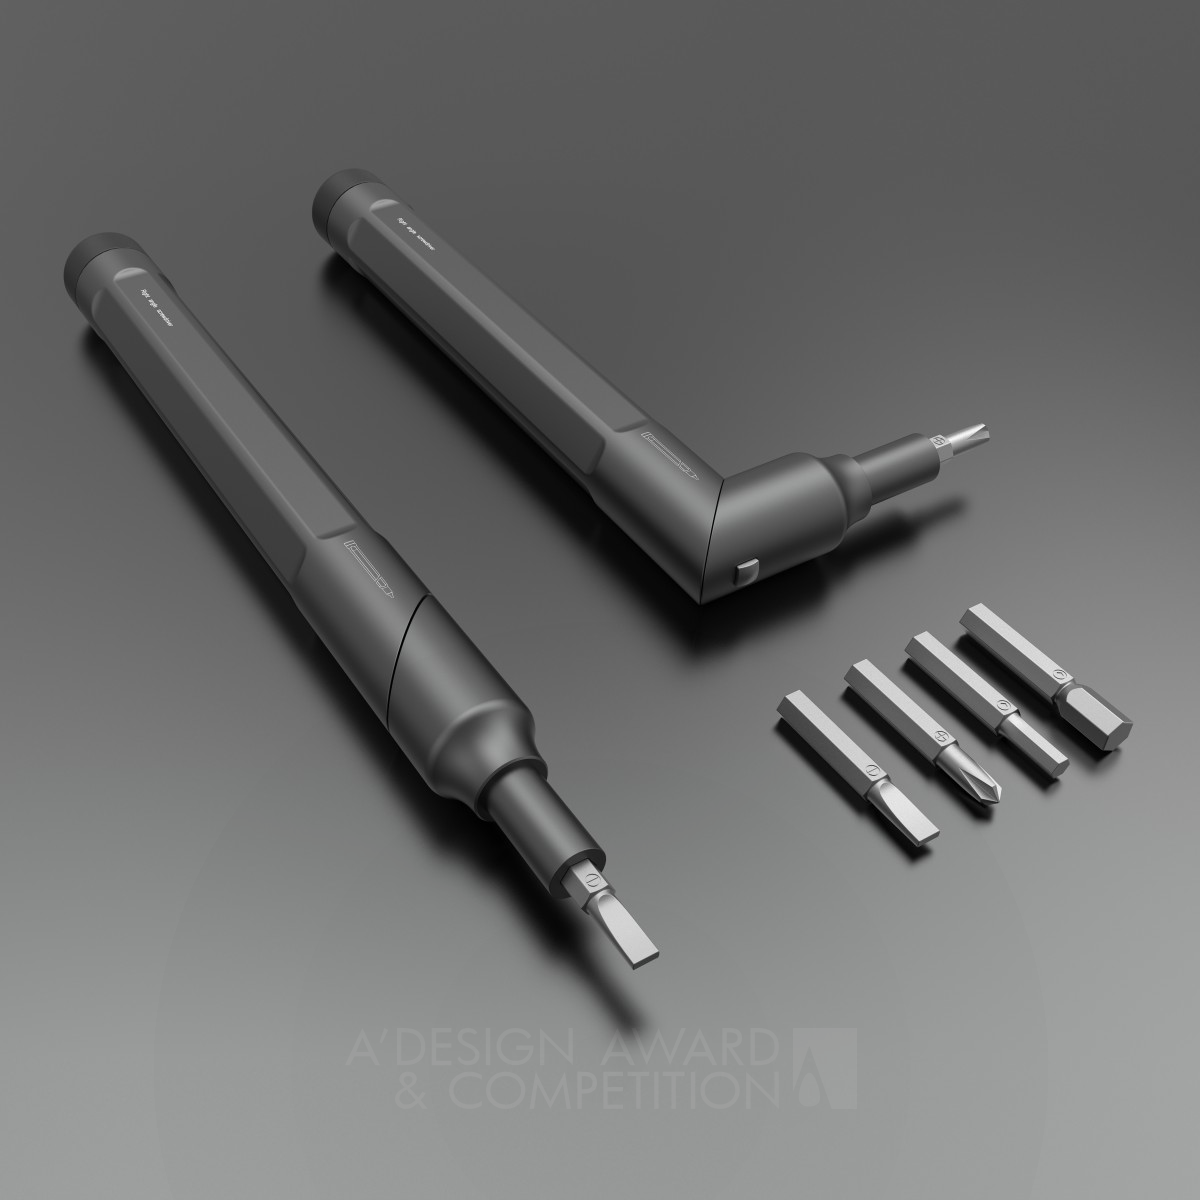 Right Angle Screwdriver by Qiu Liwei